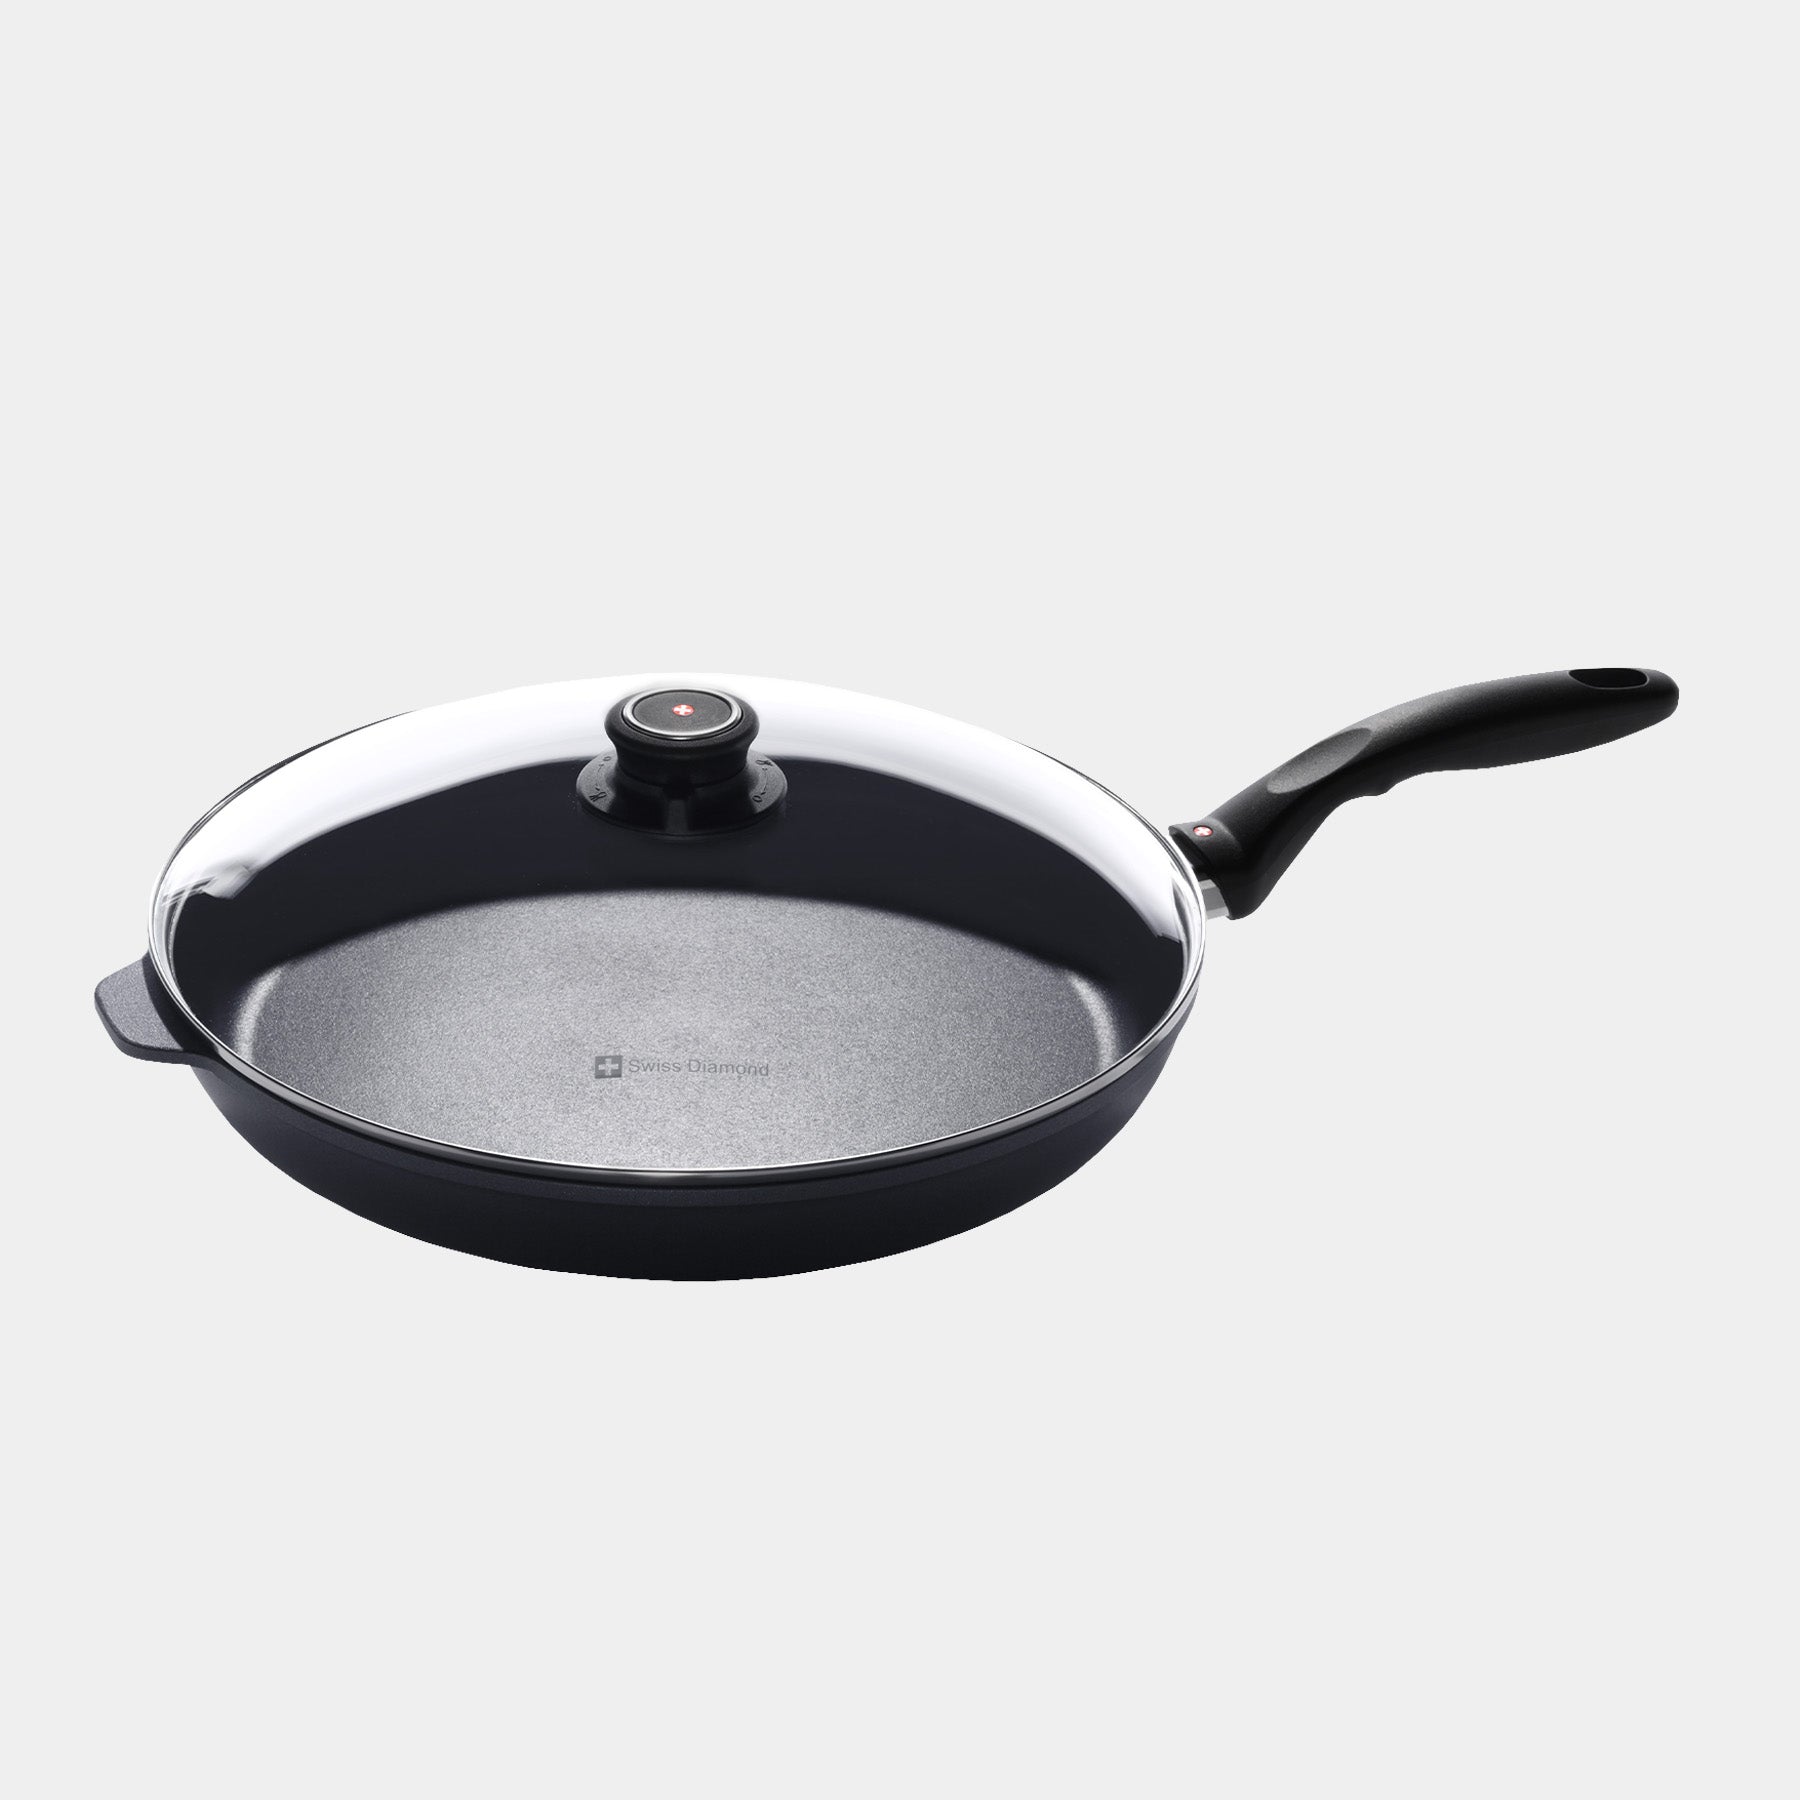 HD Nonstick 12.5" Fry Pan with Glass Lid - Induction